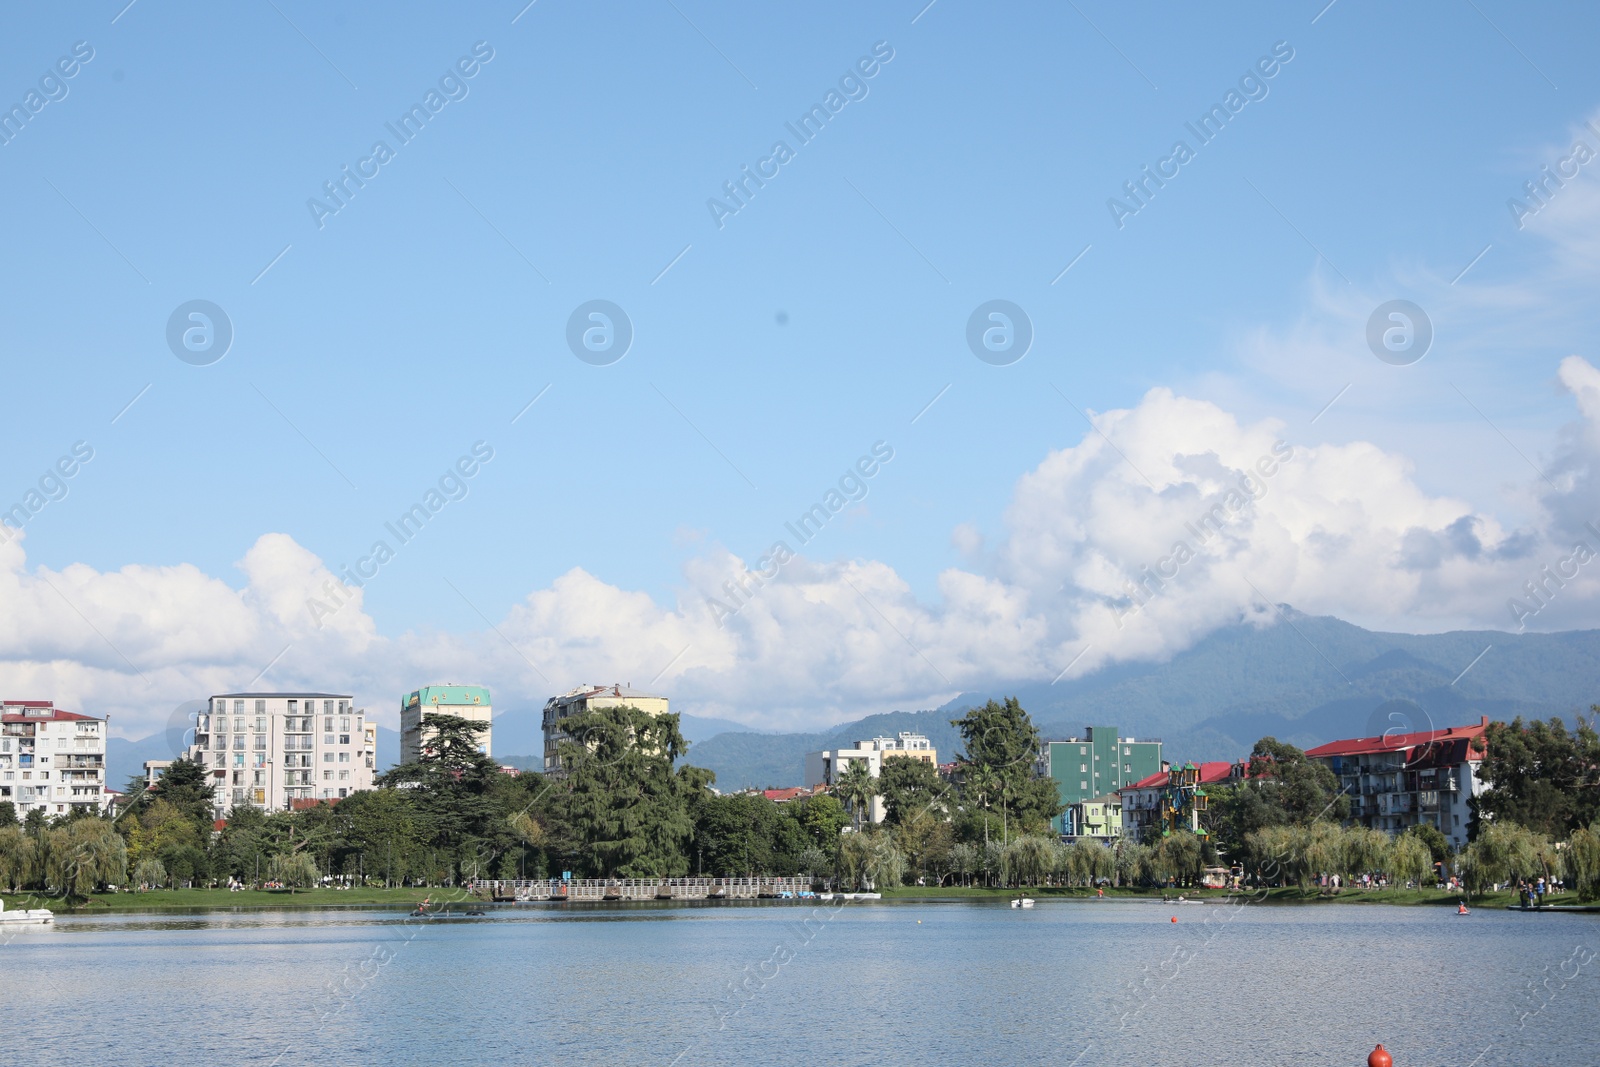 Photo of Batumi, Georgia - October 12, 2022: Picturesque view of city near Nurigeli lake and mountains